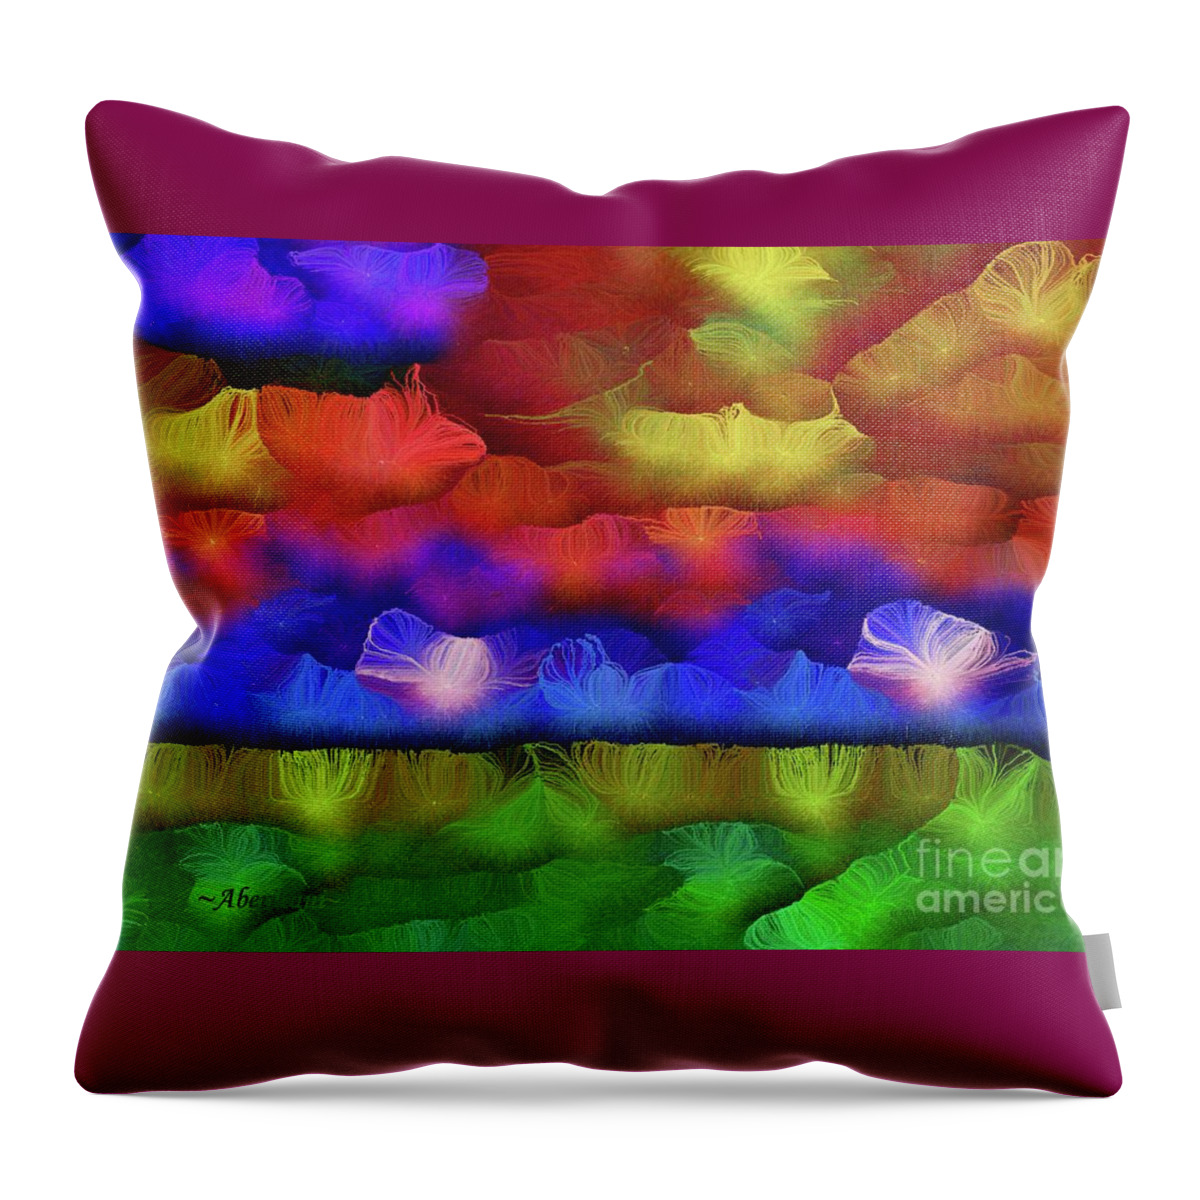 Dreams Throw Pillow featuring the digital art Landscape for a Dream Fulfilled by Aberjhani